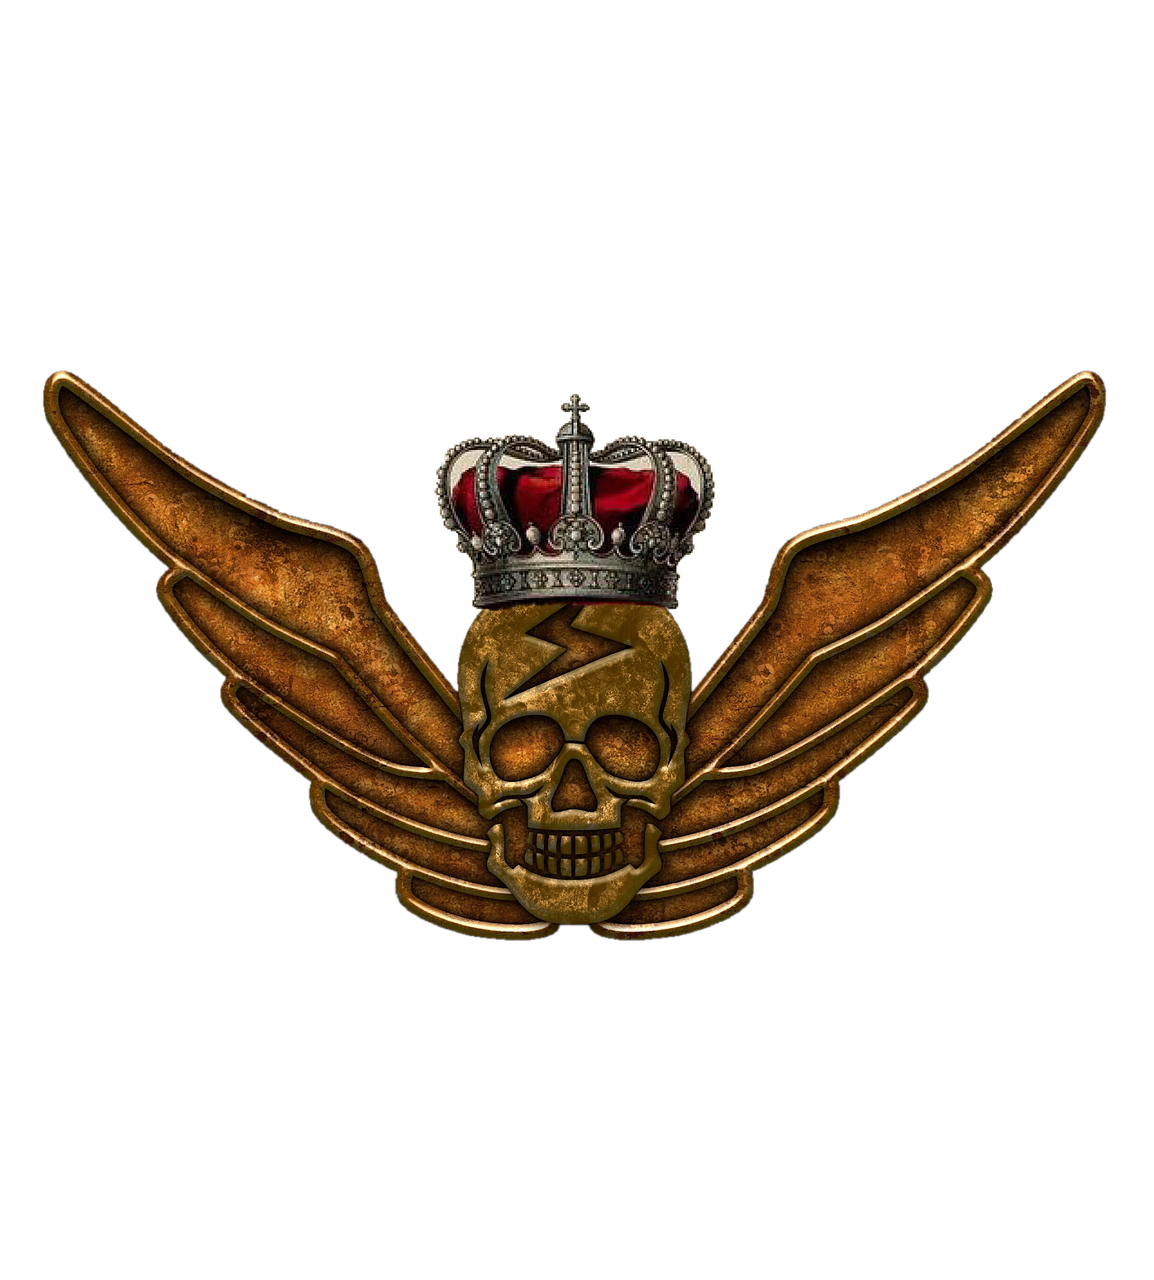 a gold skull with a crown on top of it, by Bob Ringwood, digital art, aircraft wings on back, military insignia, 4k high res, biker